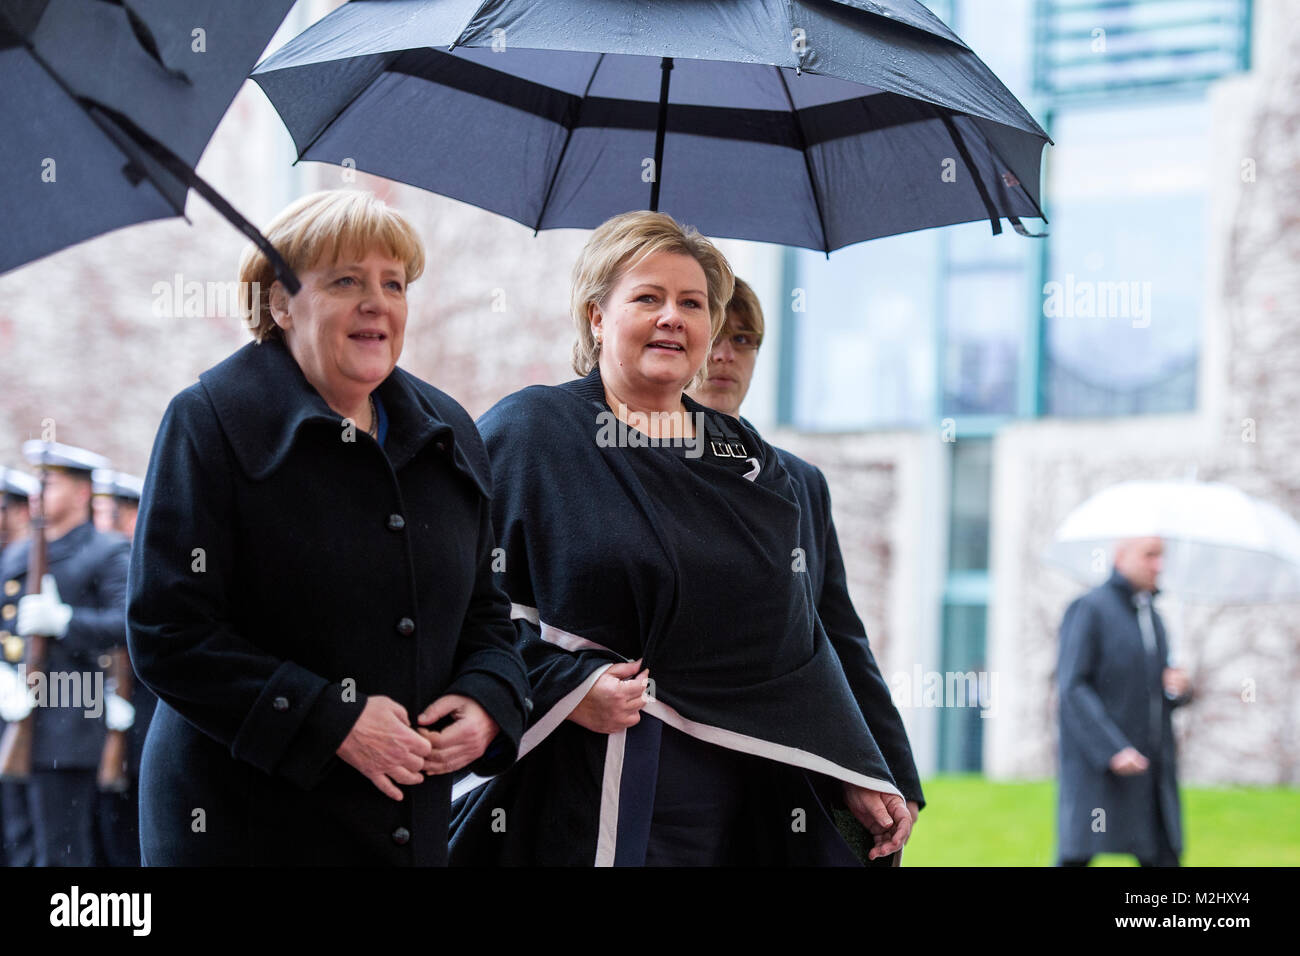 German Chancellor Angela Merkel give the welcomes to the Prime Minister of the Kingdom of Norway, Erna Solberg, with military honors in the Federal Chancellery. Stock Photo